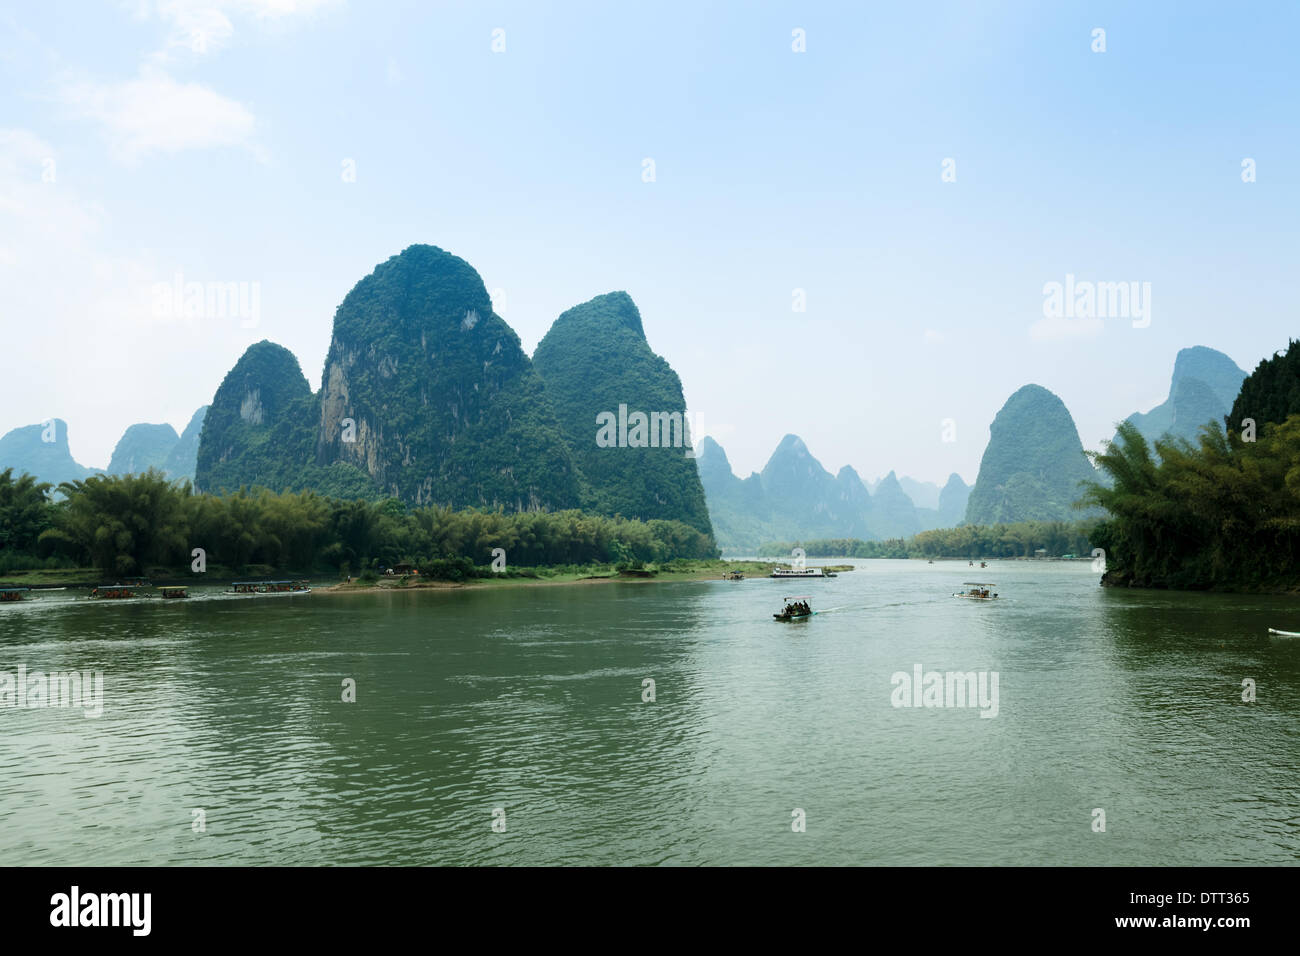 the scenery of guilin, China Stock Photo